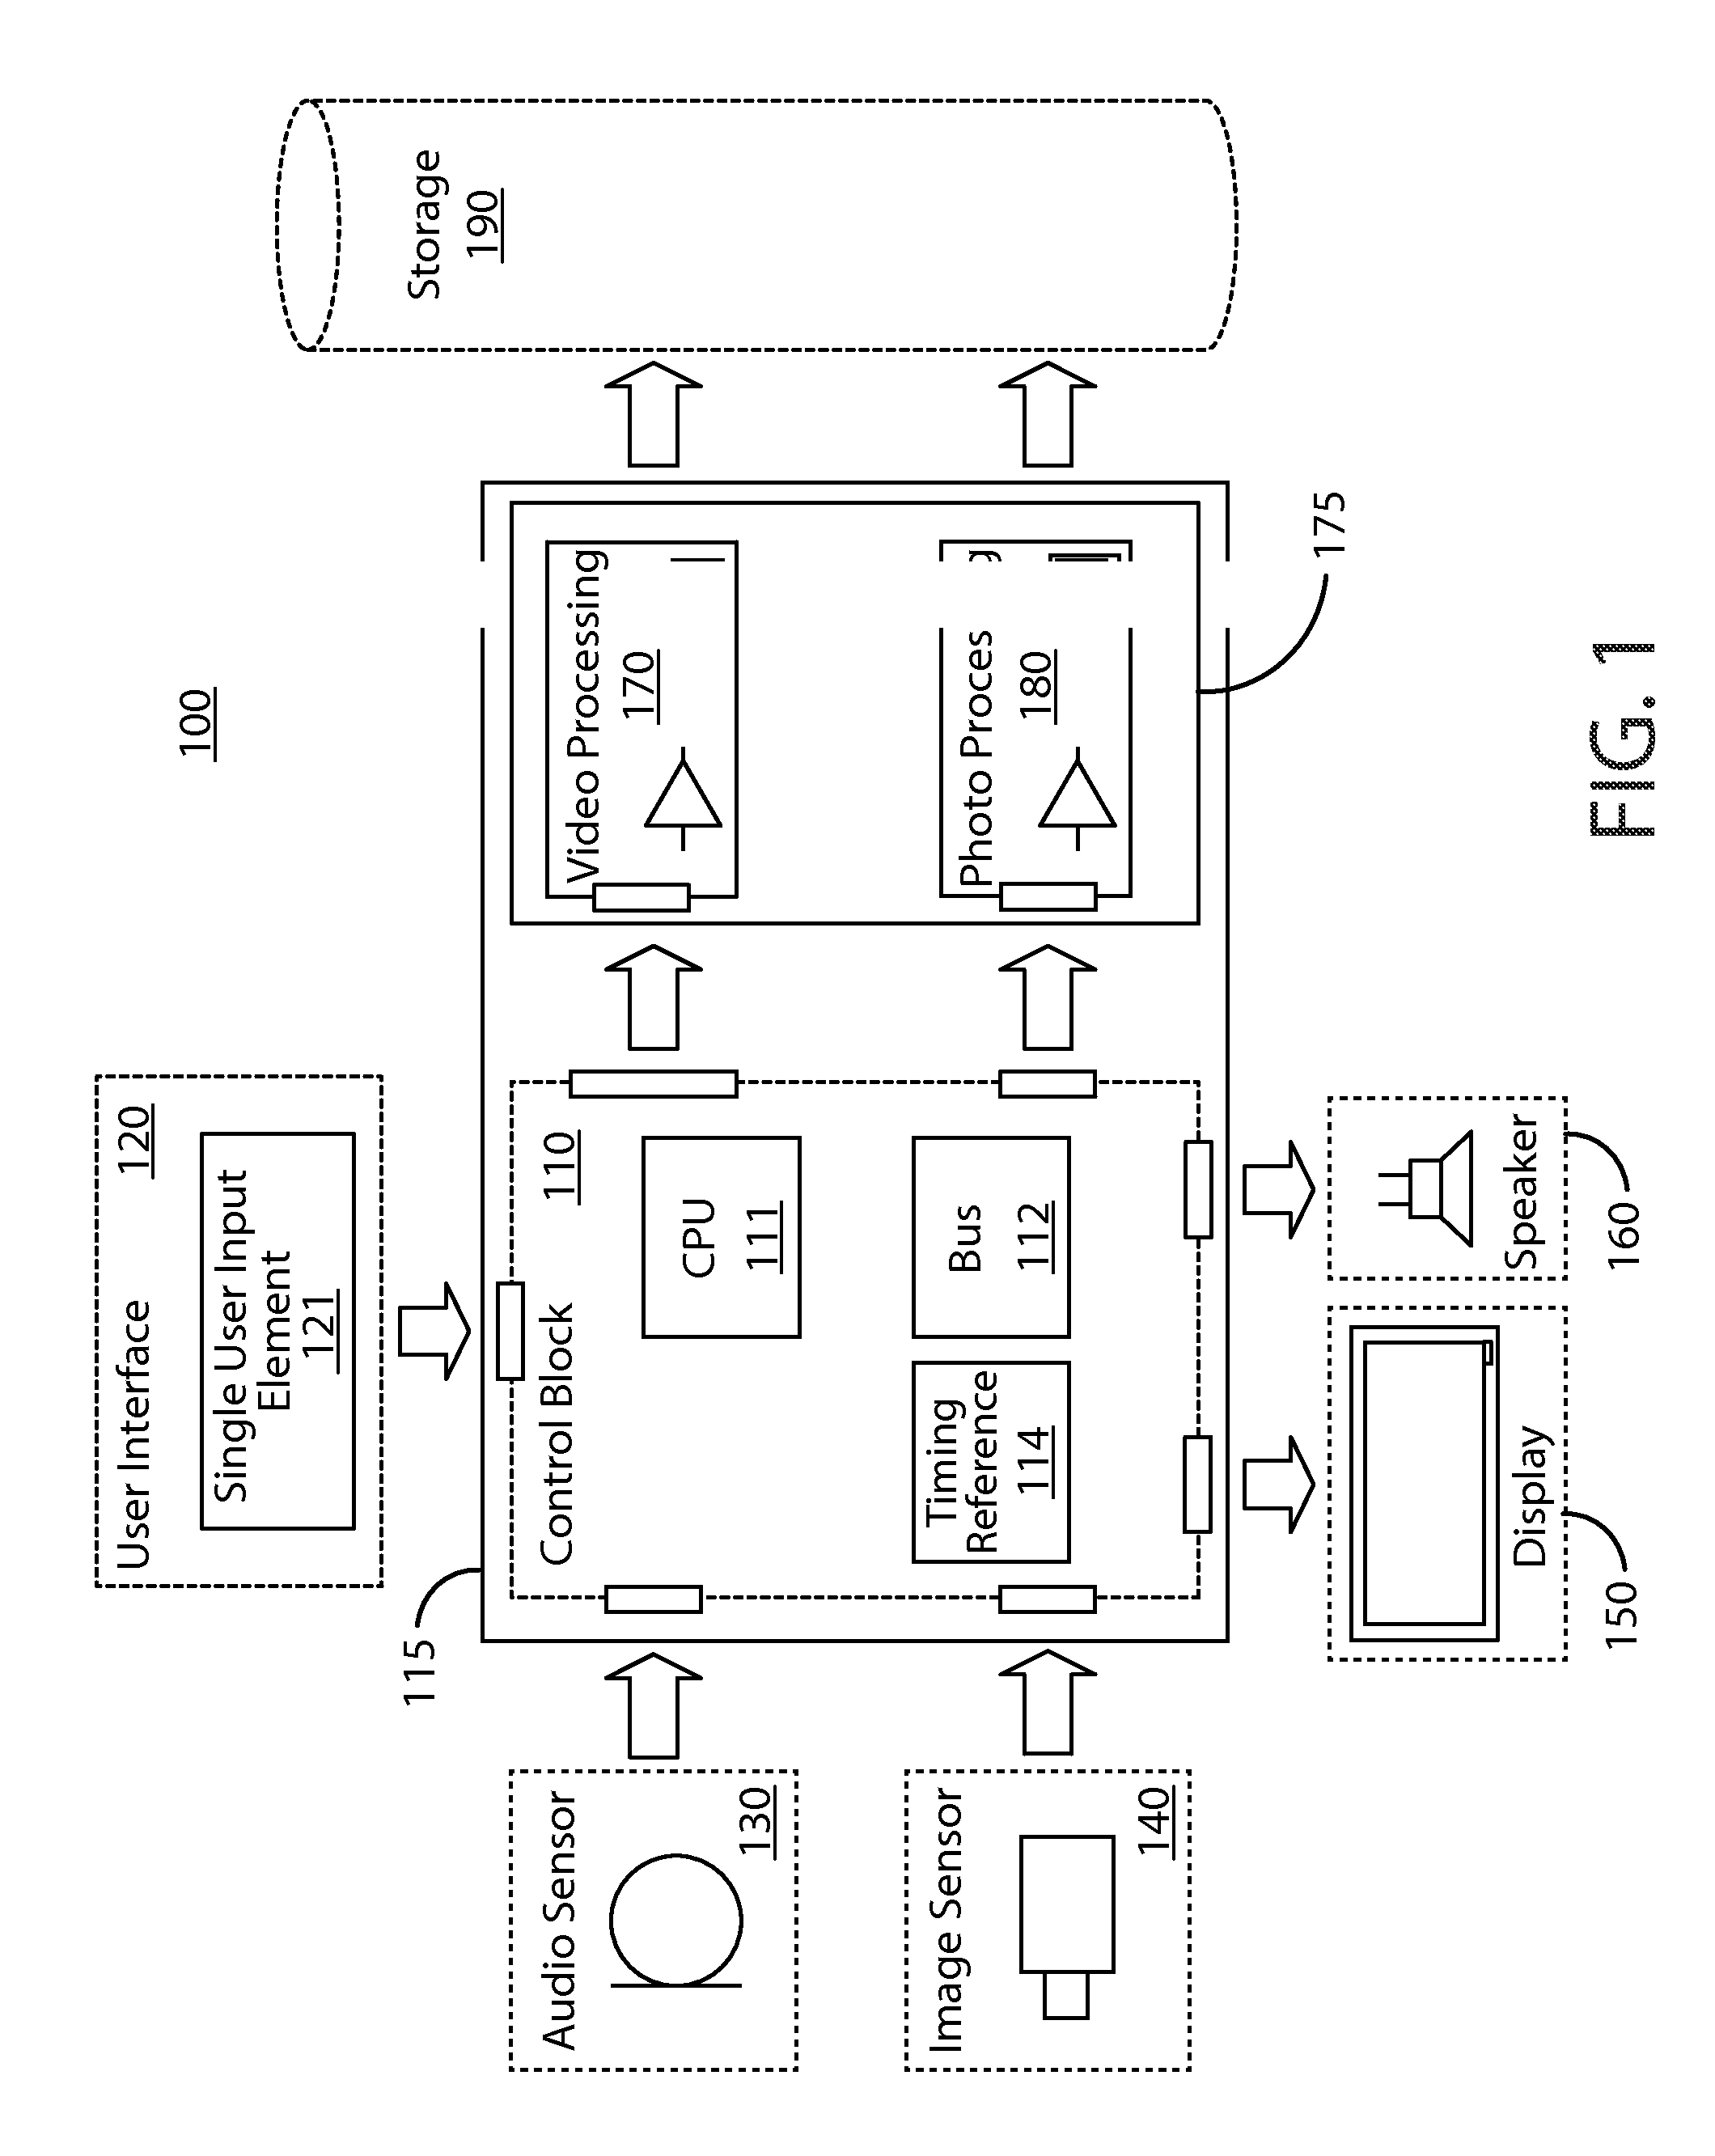 Device and method for photo and video capture